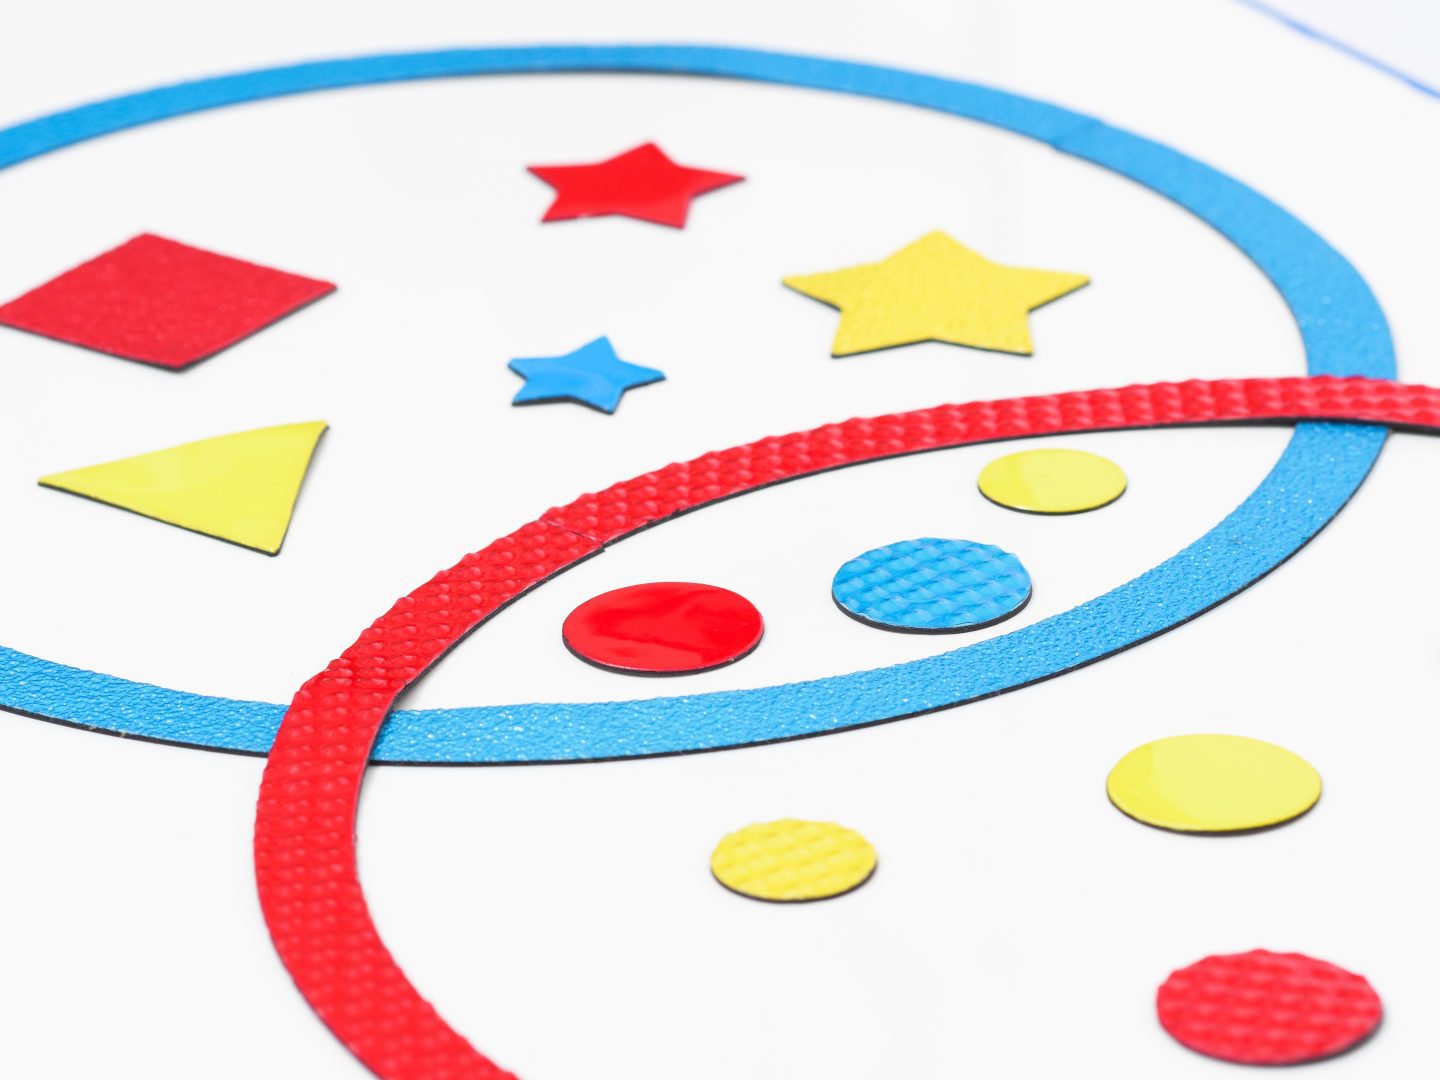 A picture of large textured circles that overlap. Inside are differently textured shapes including stars, circles, triangles, and squares in shades of red, yellow, and blue.